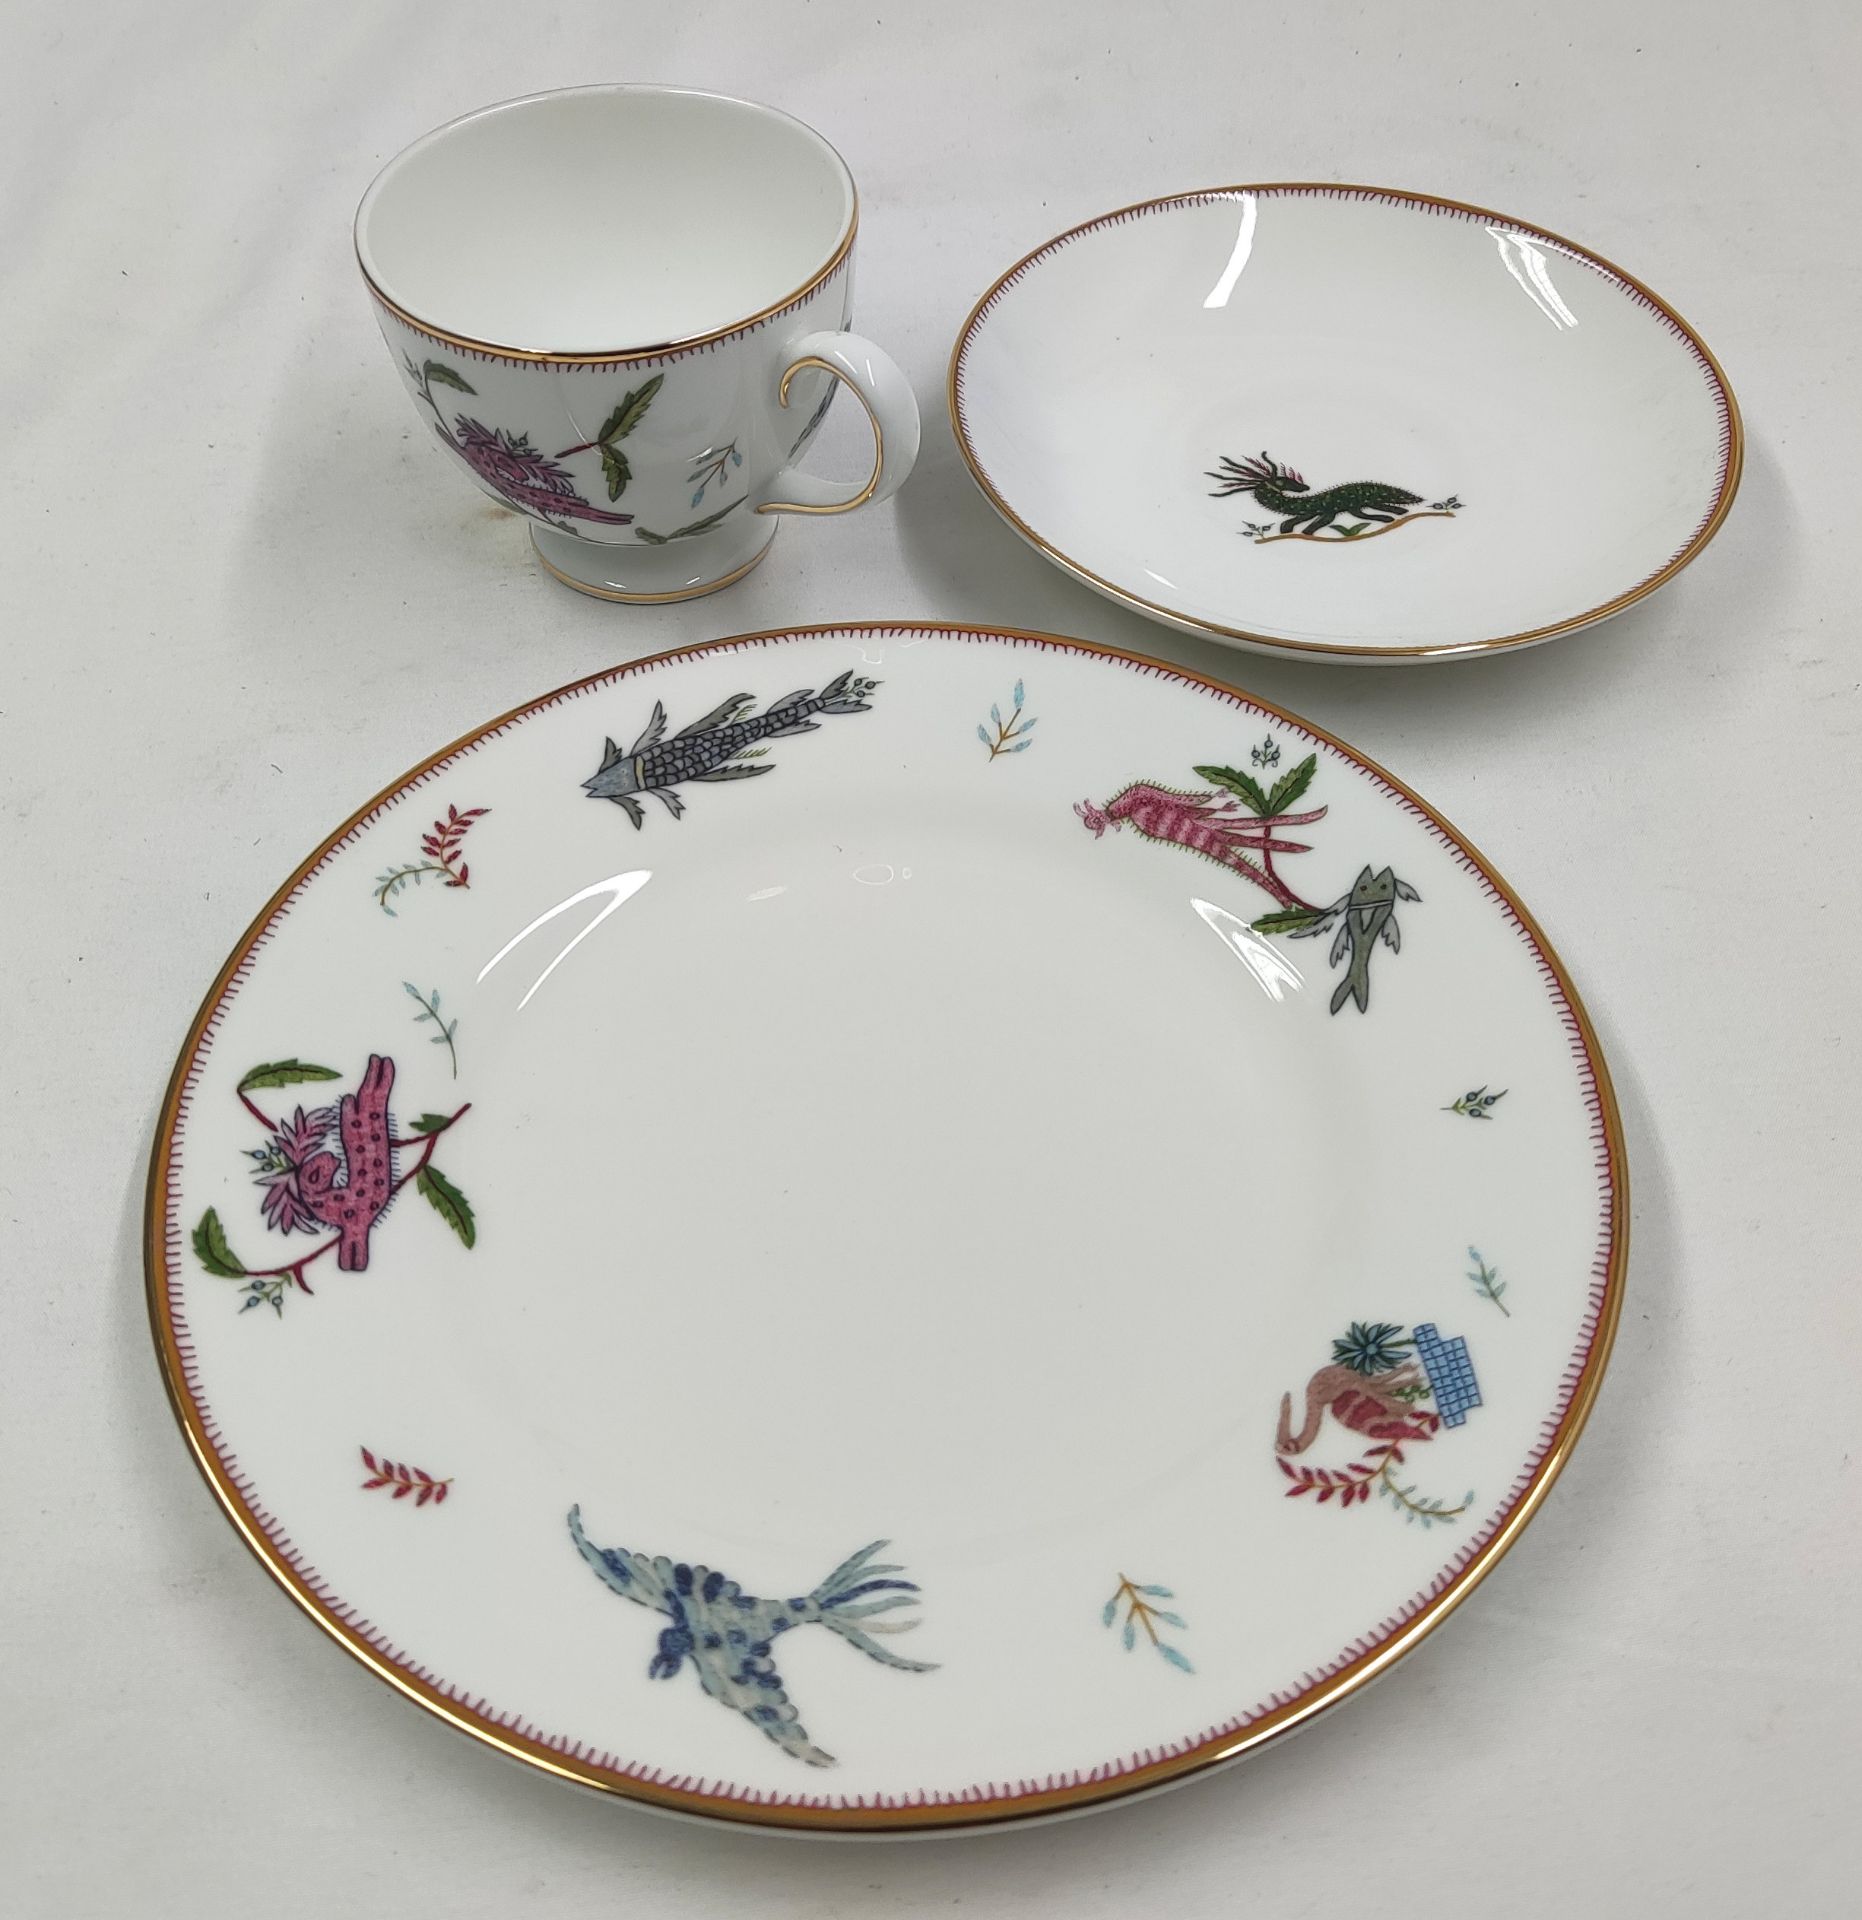 1 x WEDGWOOD Mythical Creatures Fine Bone China Teacup/Saucer/Plate Set - New/Boxed - RRP £140.00 - Bild 10 aus 20